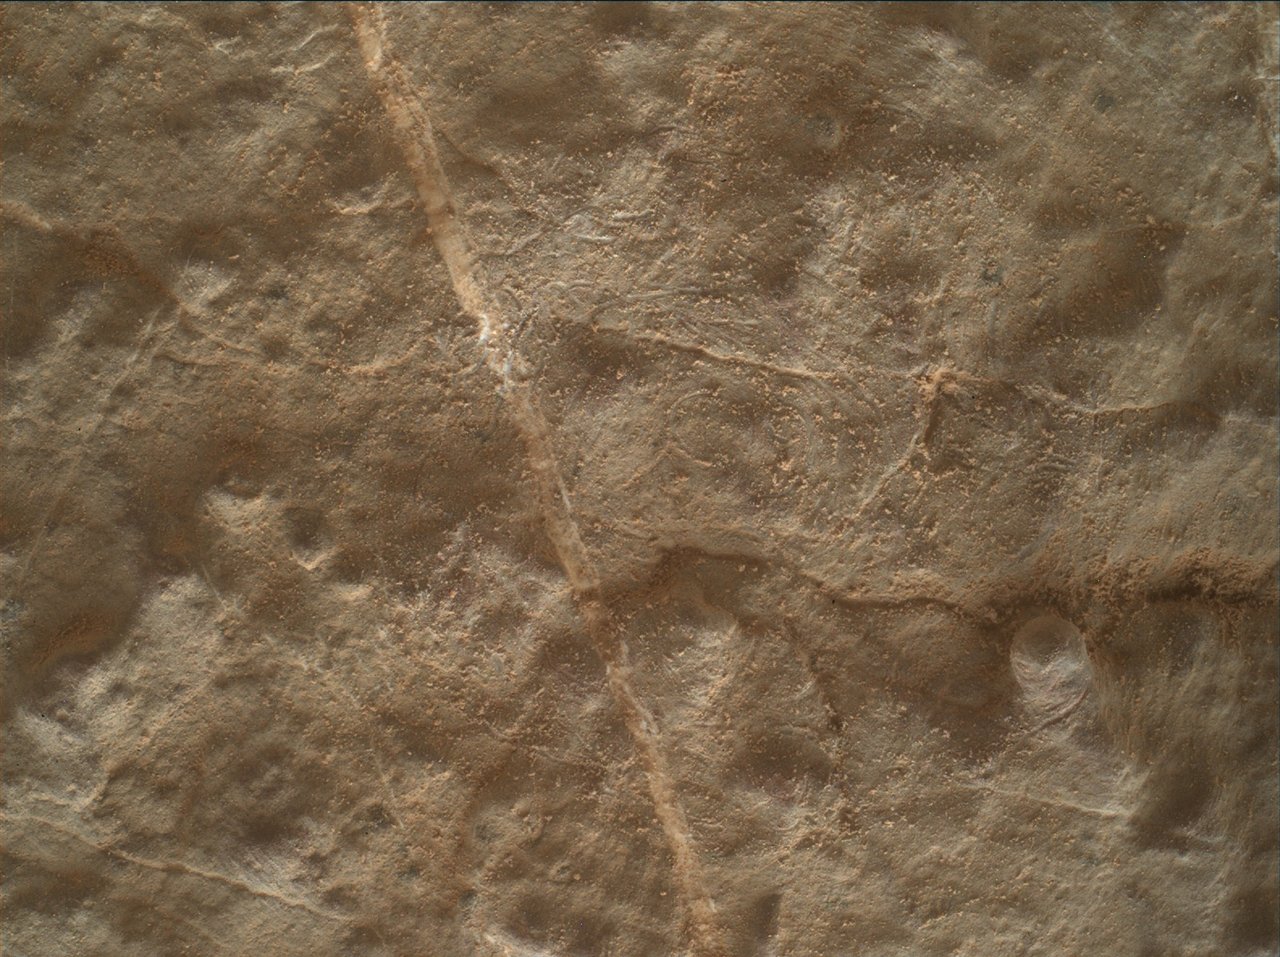 MAHLI image featuring bedrock and veins. This image was taken by MAHLI onboard NASA's Mars rover Curiosity on Sol 2654 (2020-01-24T01:51:11.000Z).